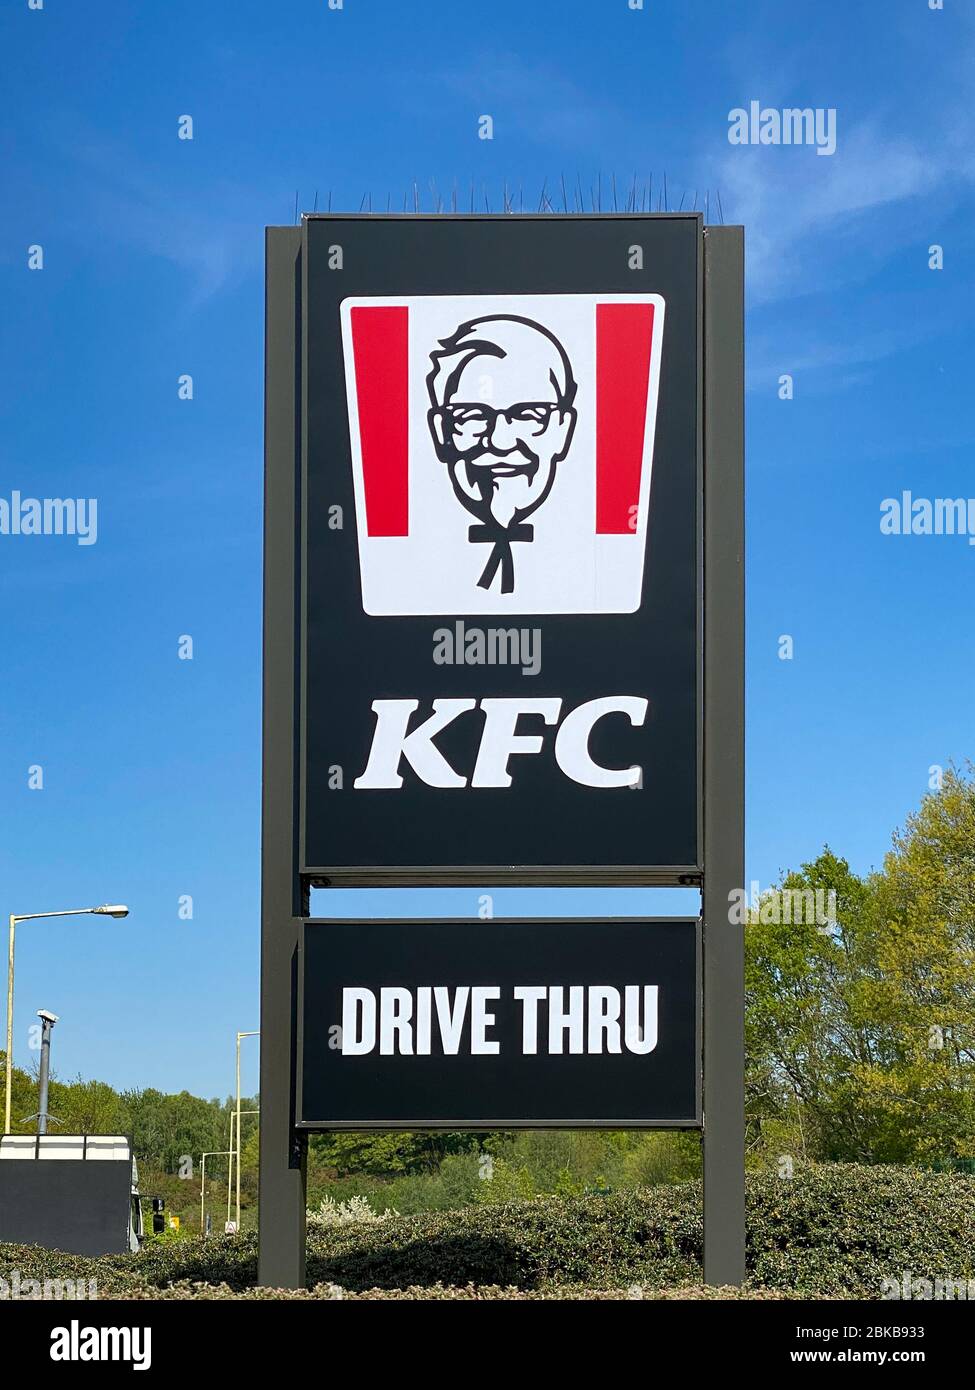 Ashford, United Kingdom - April 23, 2020: An outdoor KFC  drive thru restaurant sign.   KFC is the world's second-largest restaurant chain after McDon Stock Photo